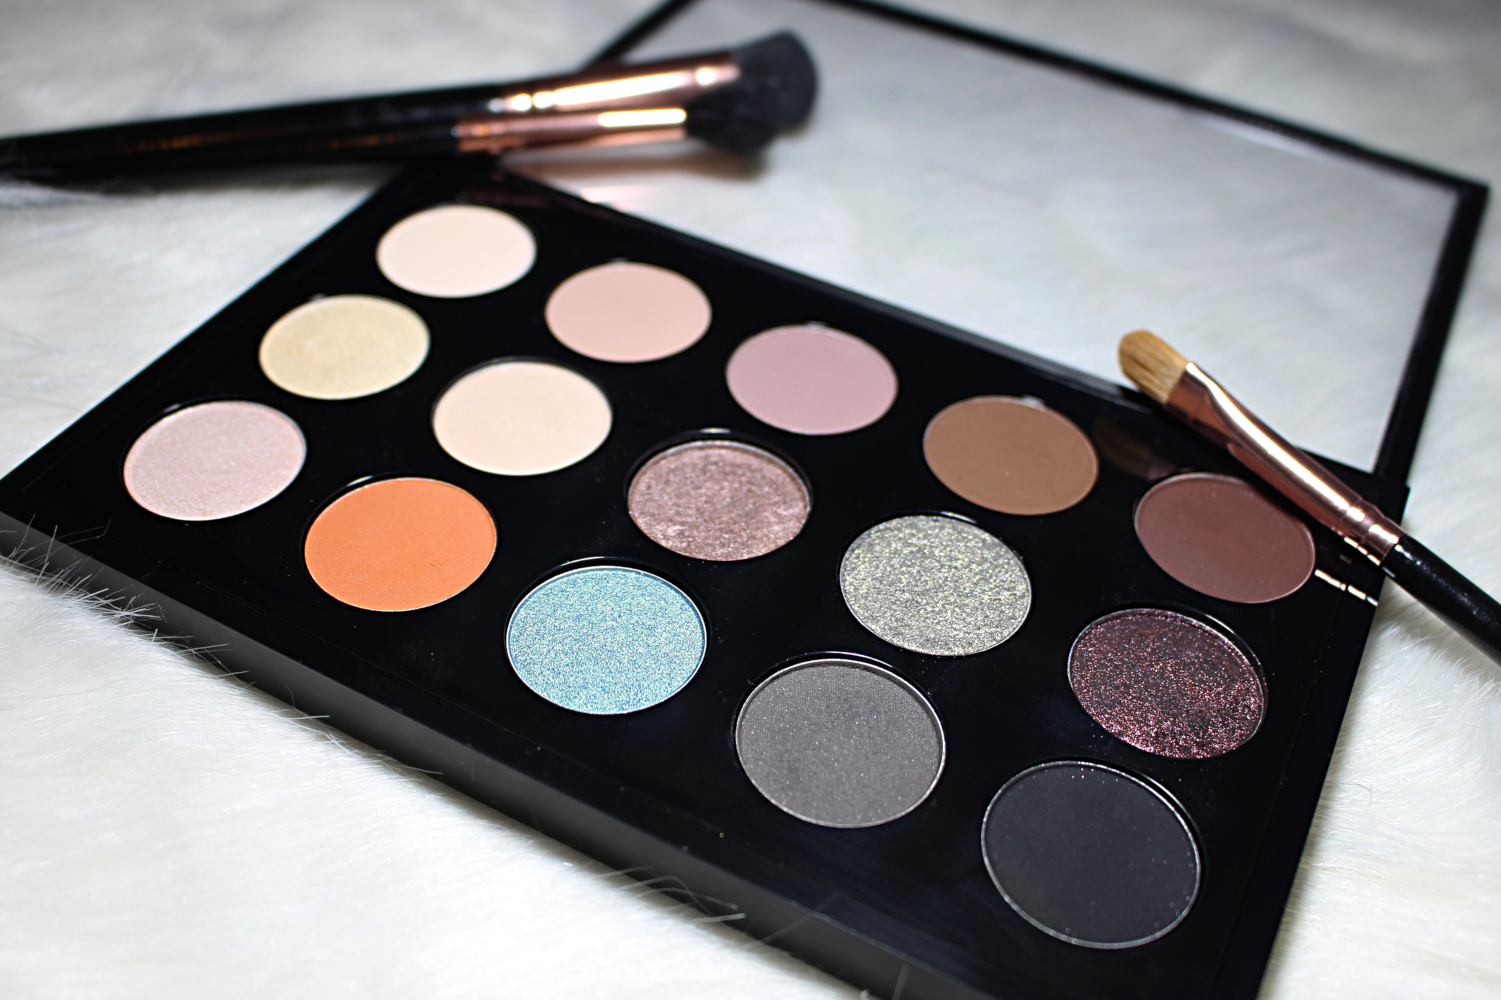 a close-up of an eyeshadow pro palette by mac cosmetics filled with single eyeshadow pans